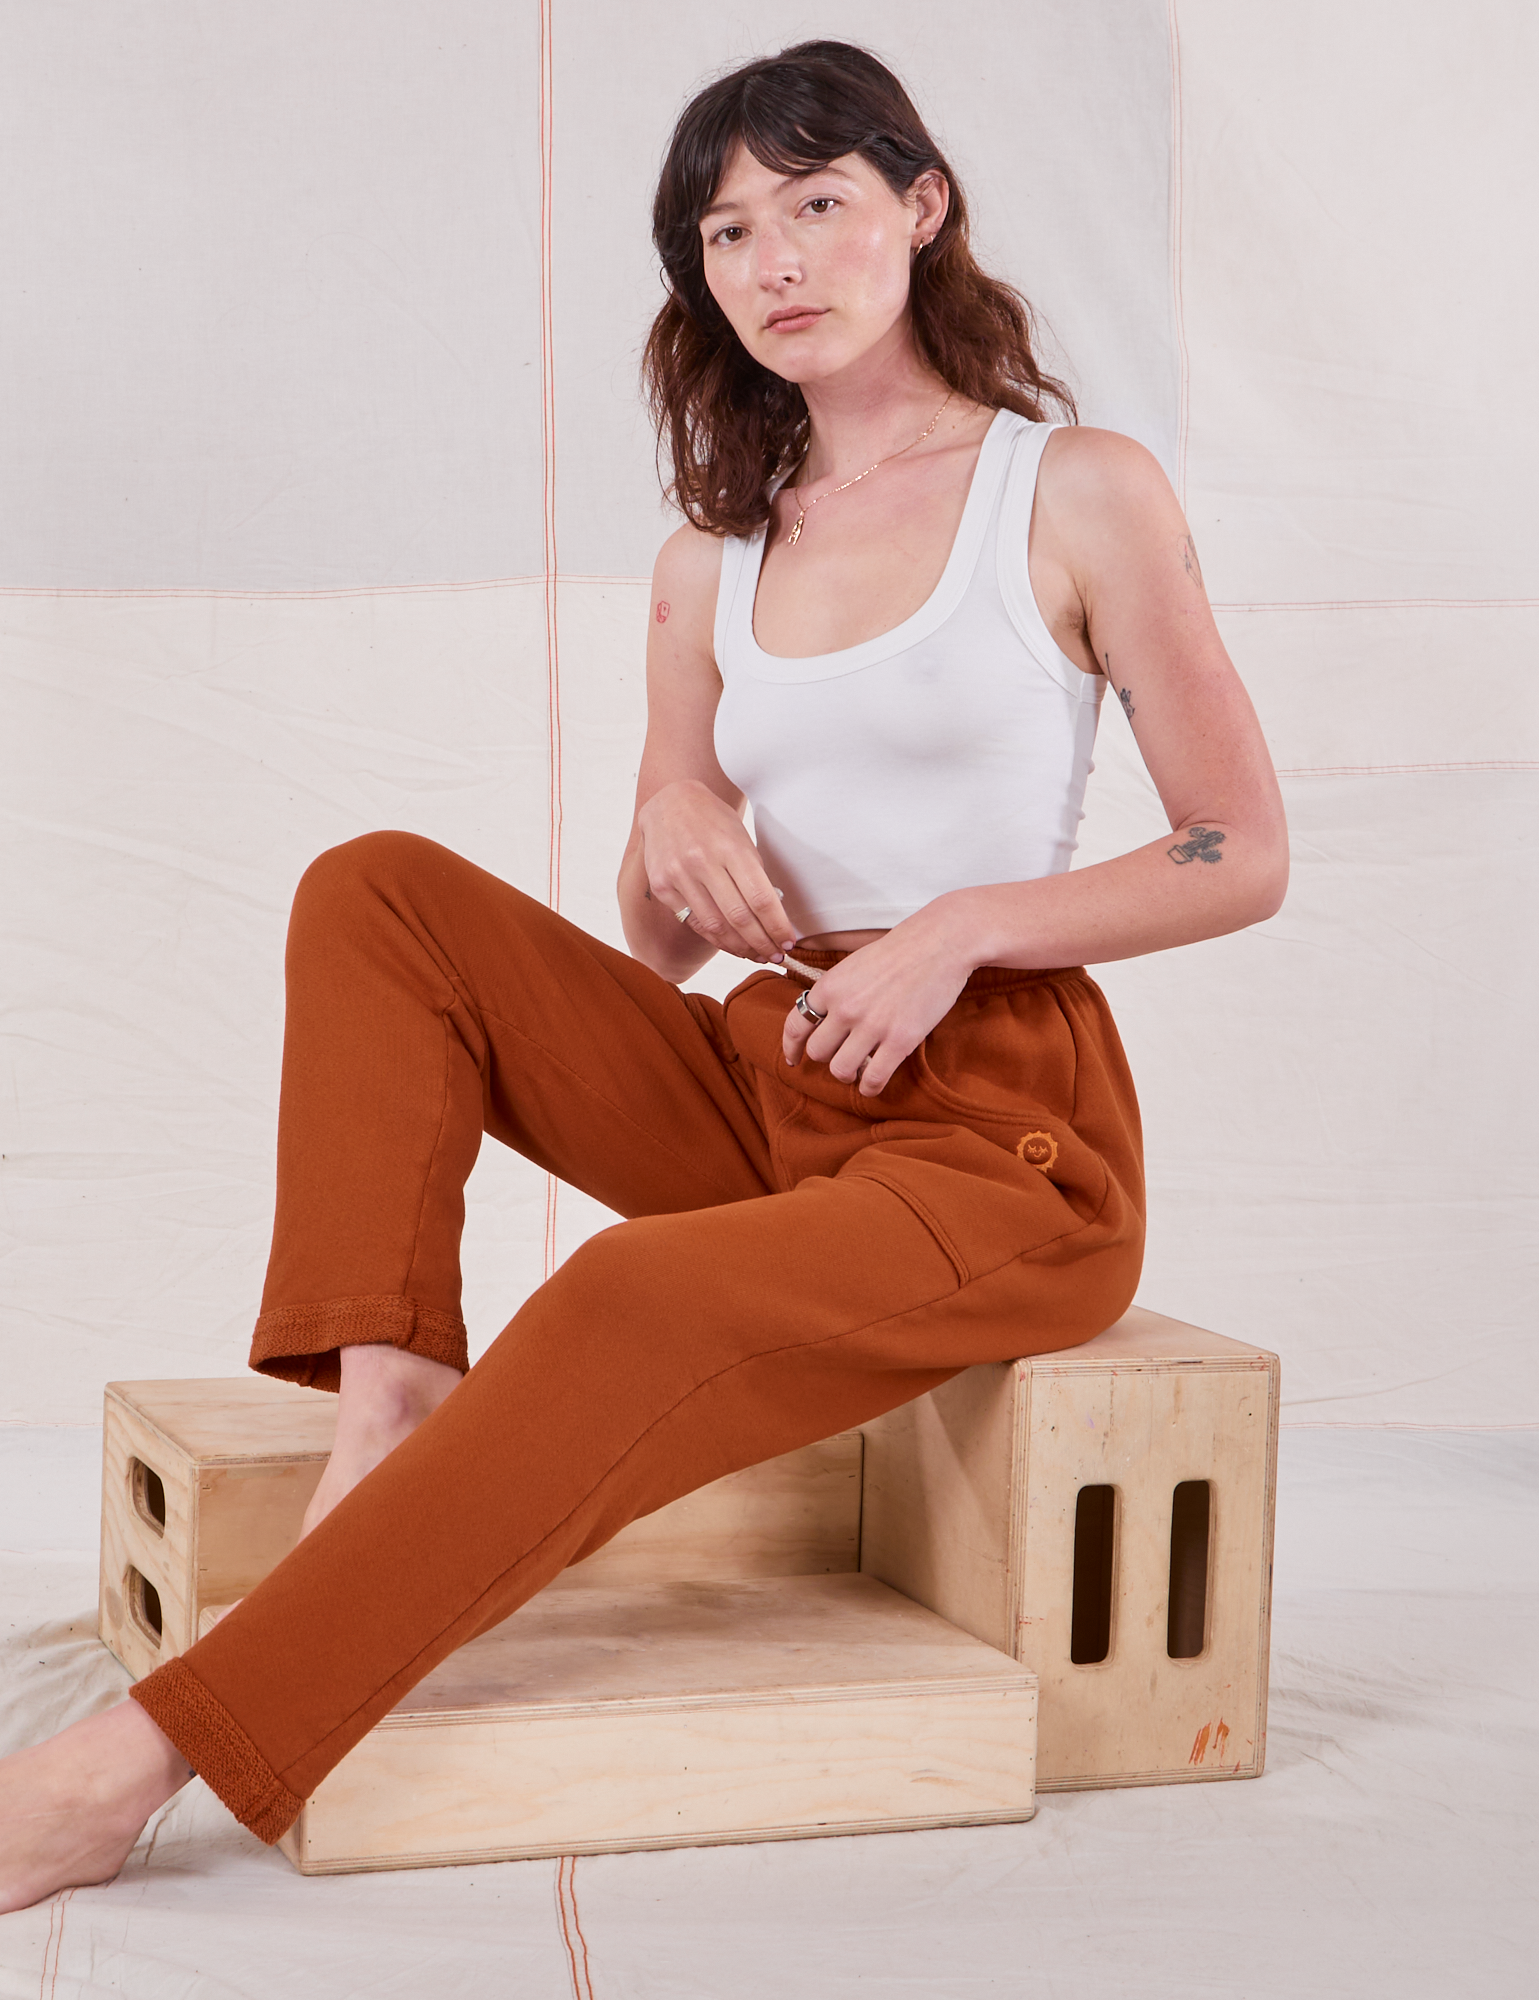 Alex is wearing Rolled Cuff Sweat Pants in Burnt Terracotta and vintage off-white Cropped Tank